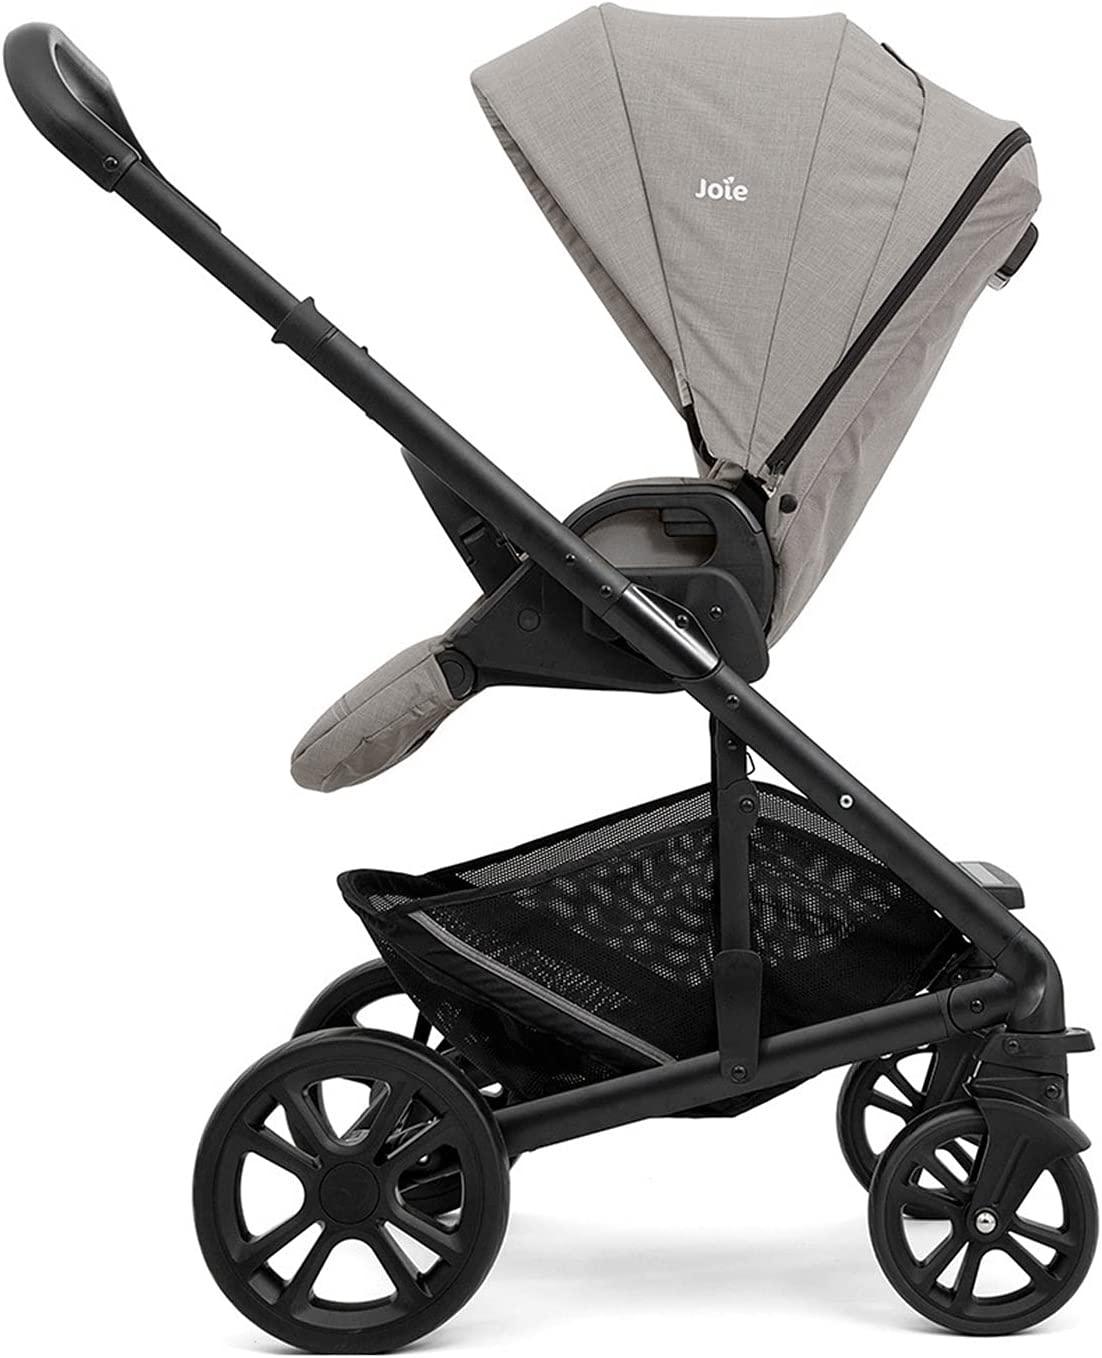 Joie Chrome Pebble Stroller - Ourkids - Joie